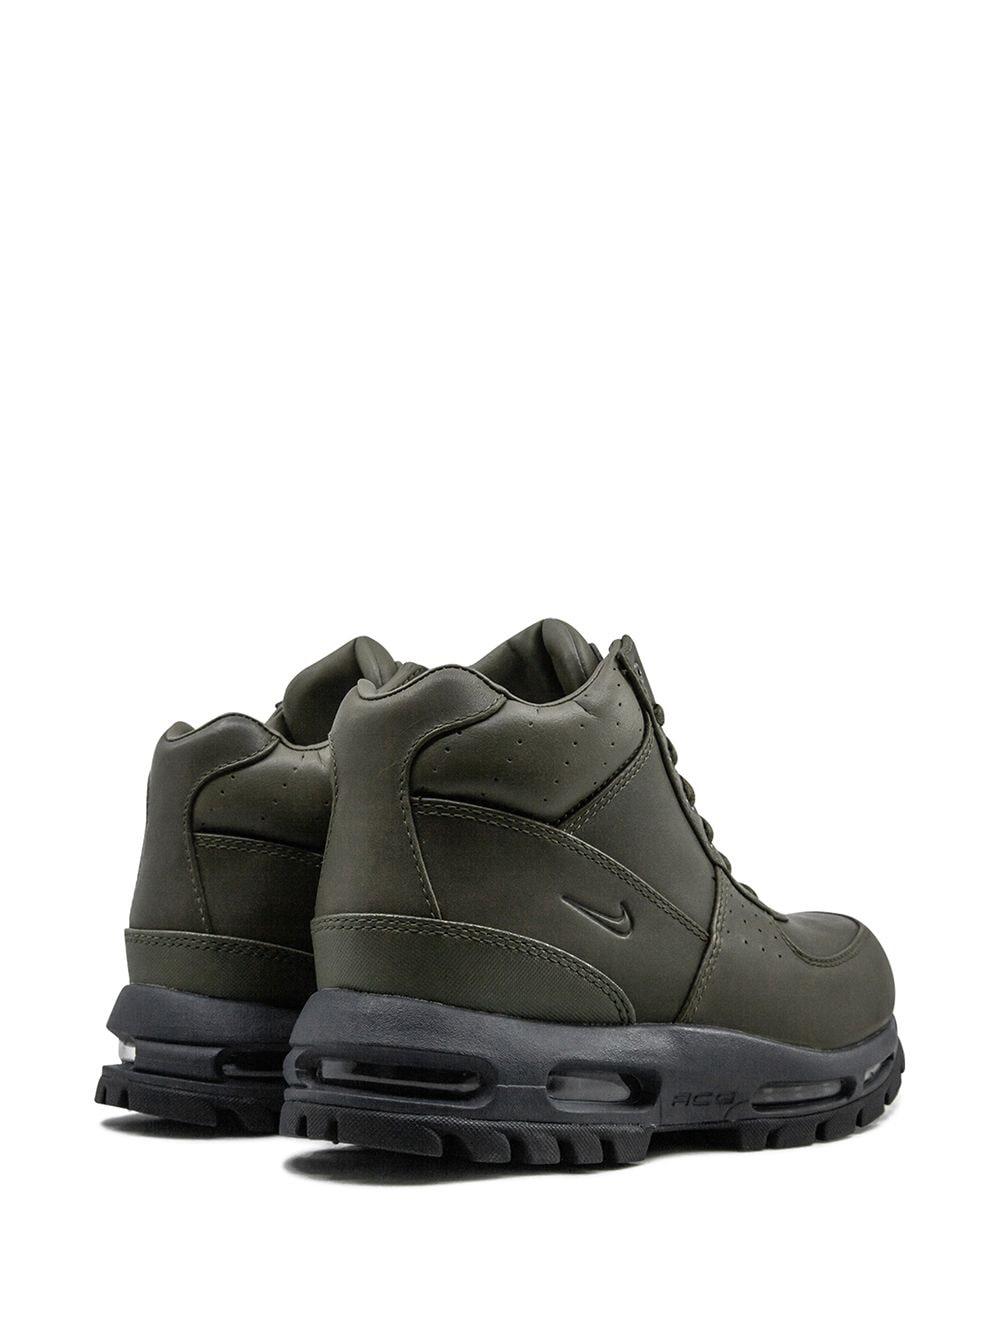 Nike Air Max Goadome Boot (olive Canvas) for Men | Lyst